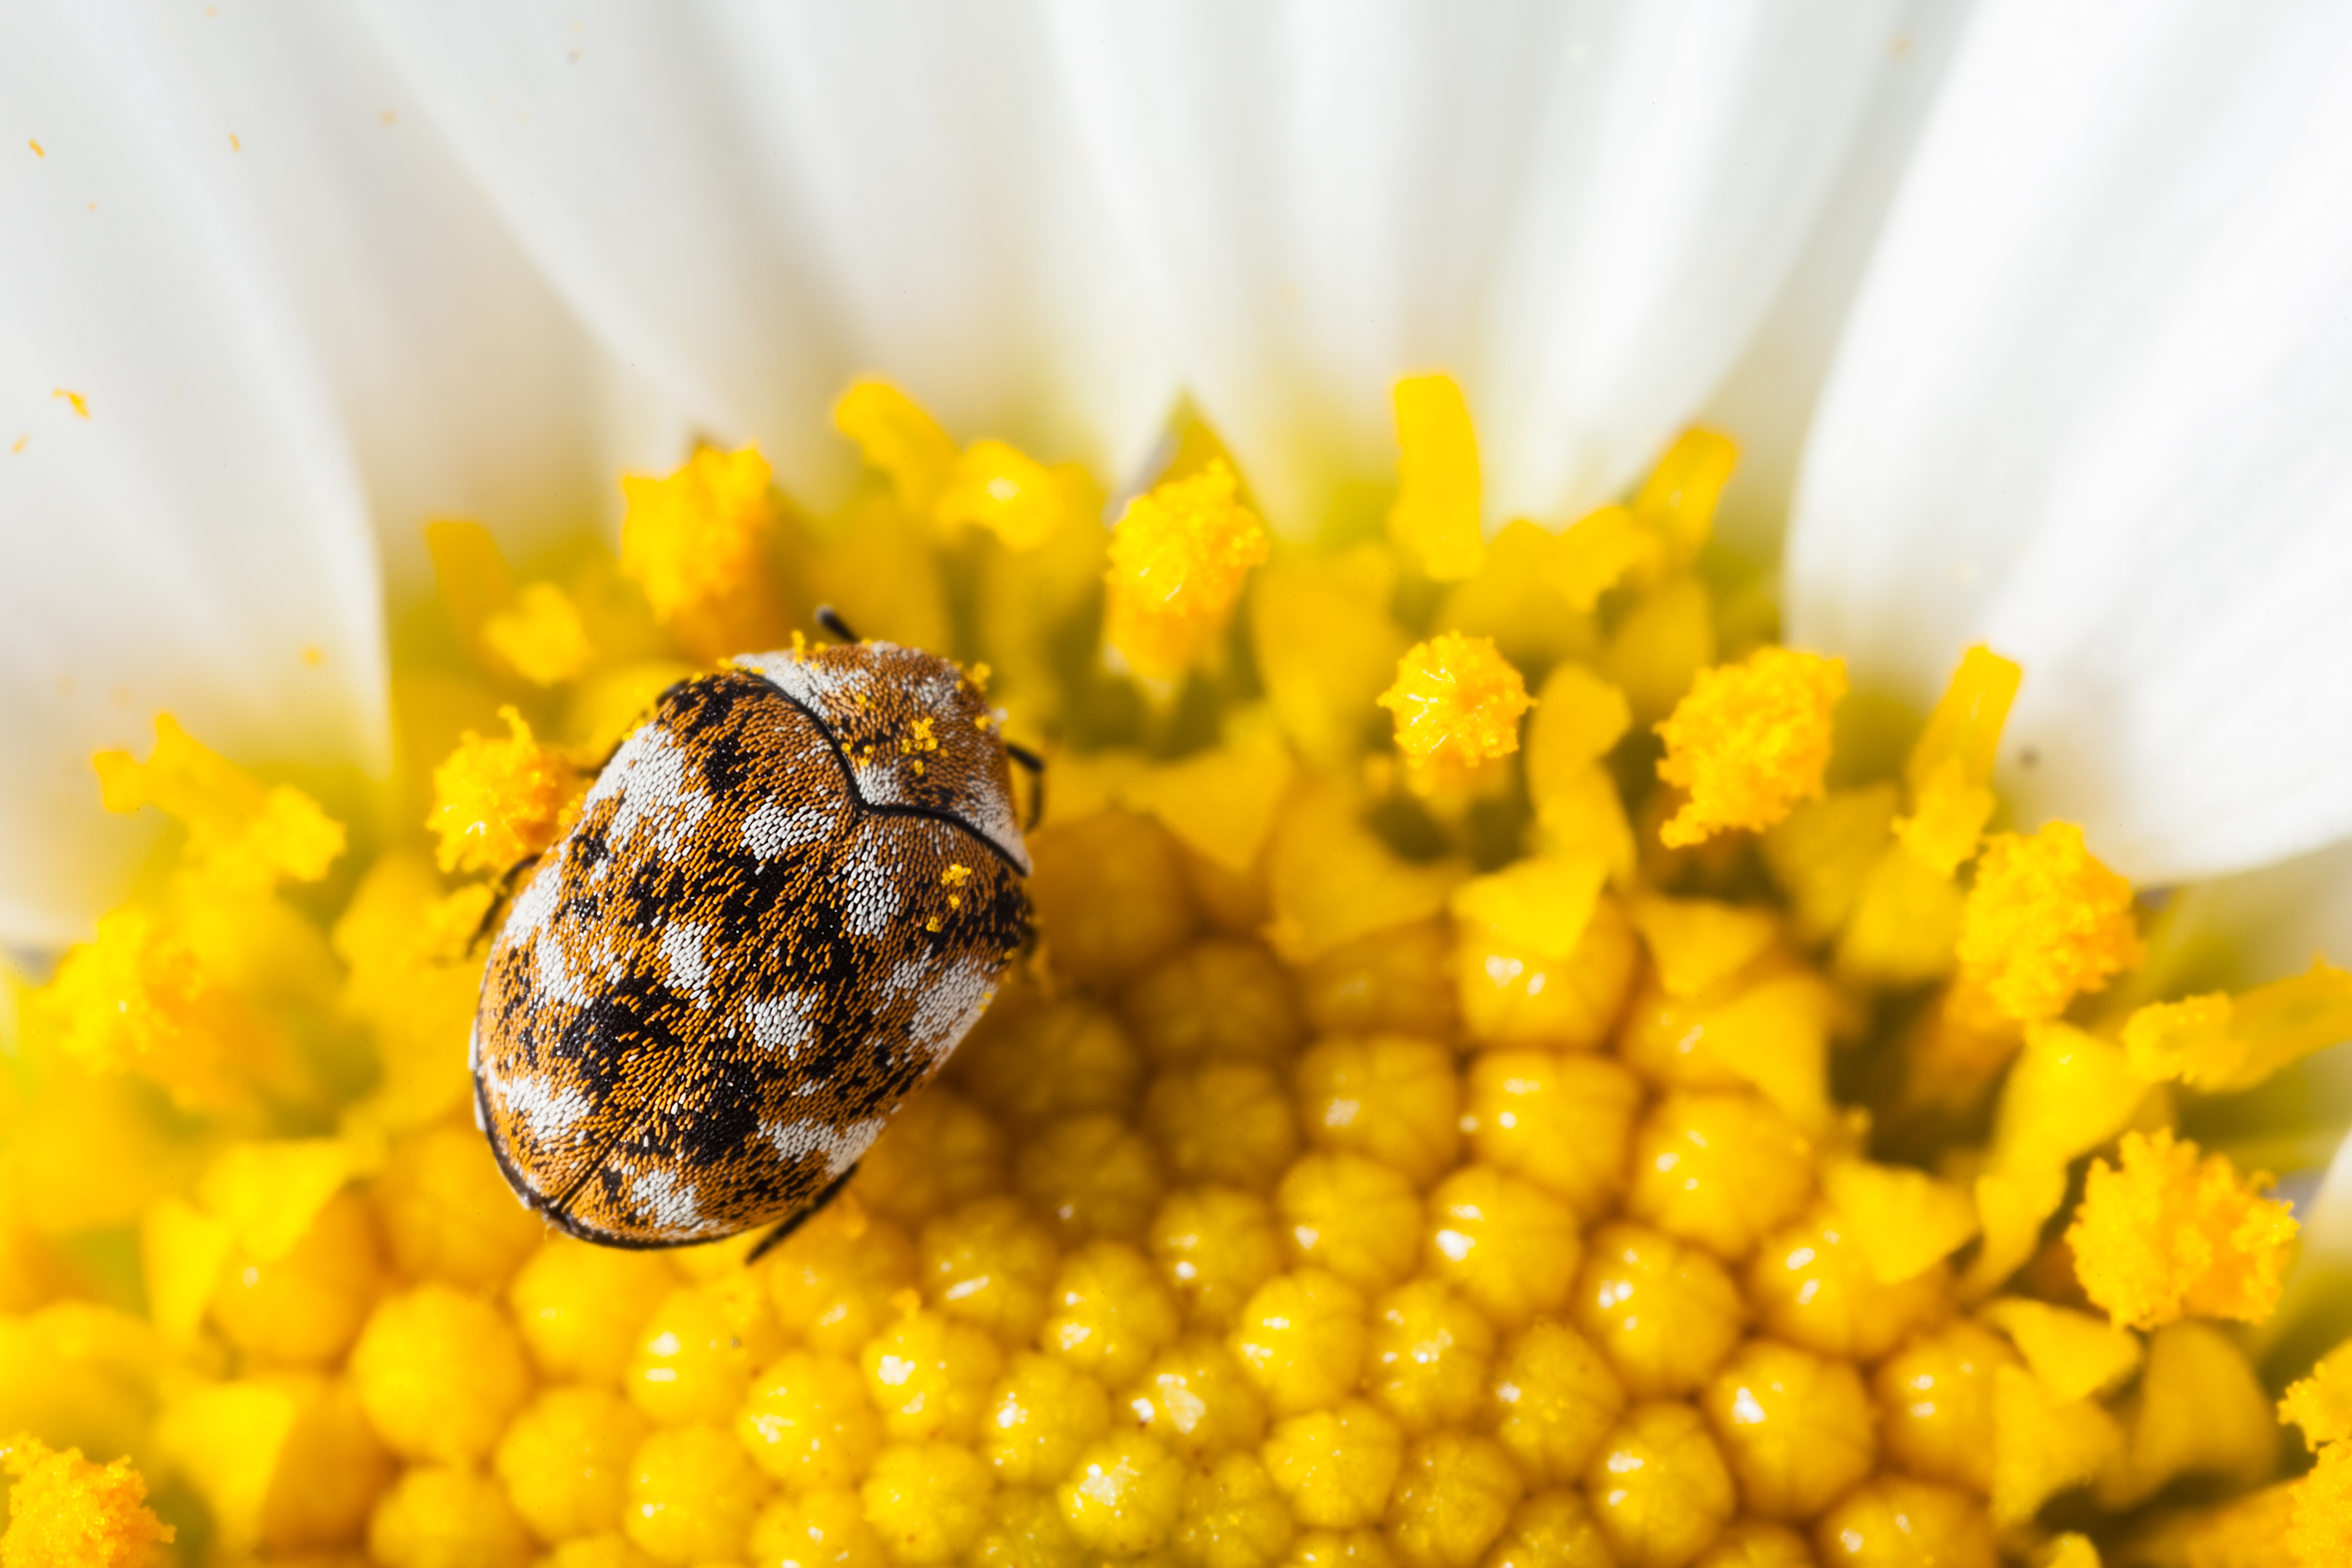 What You Need To Know About Carpet Beetles